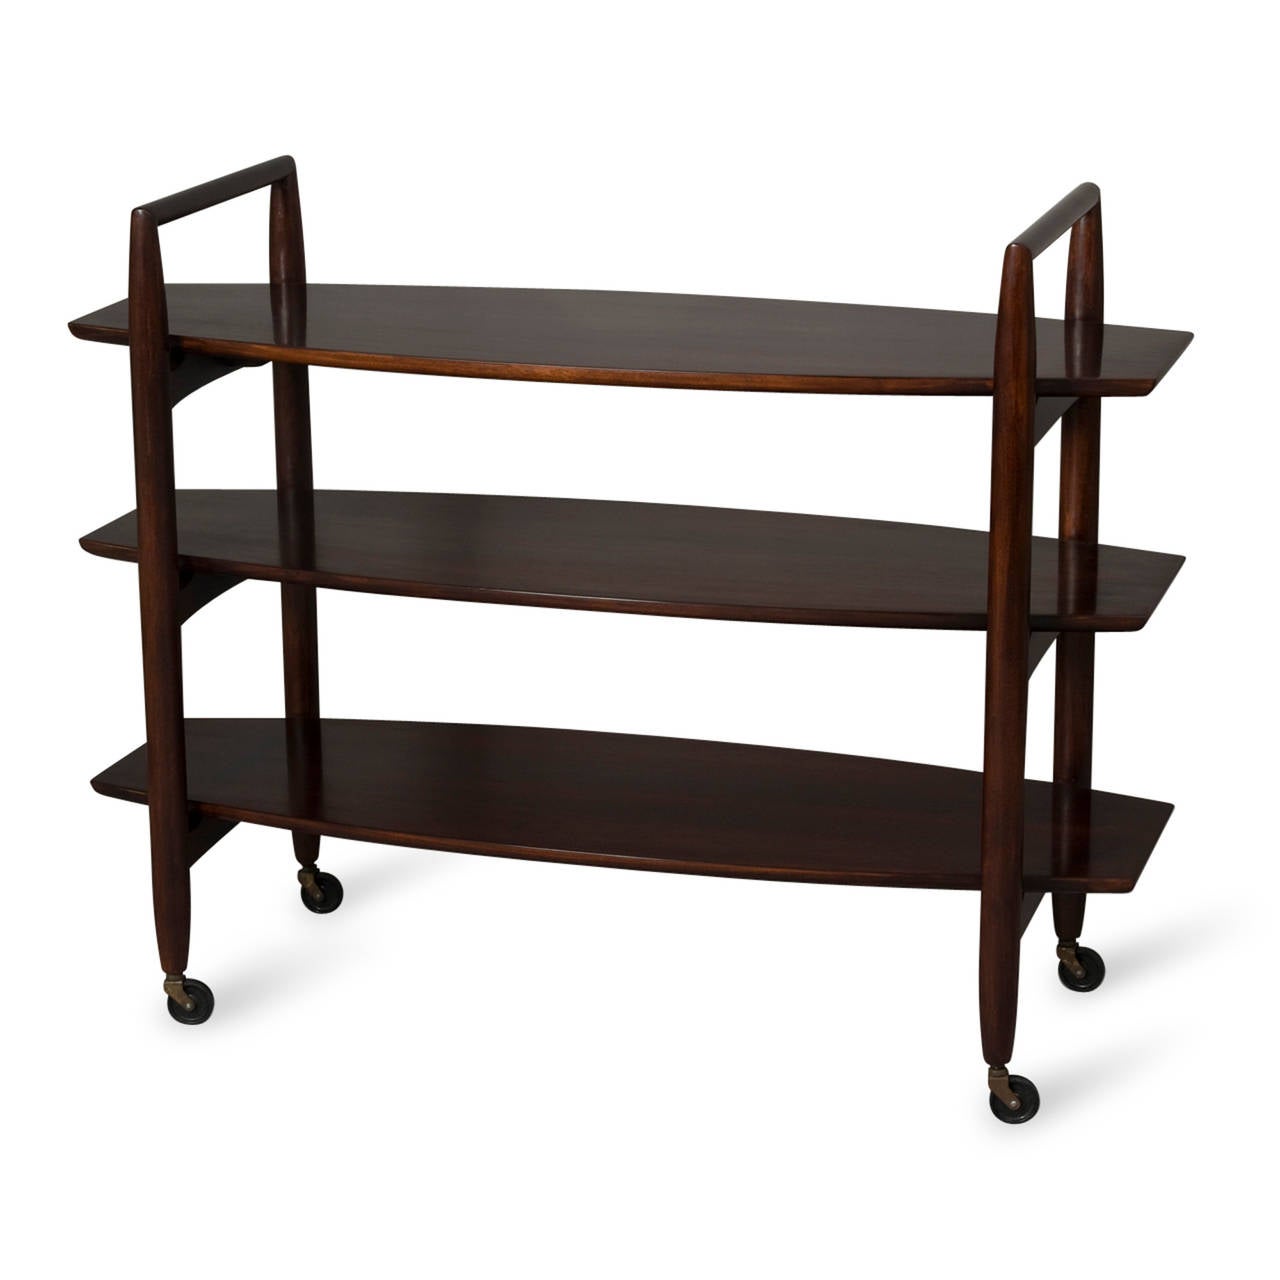 Three-tier mahogany rolling shelf, slightly oval-shaped shelves, inverted U-shaped supports, by T.H. Robsjohn-Gibbings for Widdicomb, American, 1950s. Length 46 in, depth 16 in, height to top shelf 30 in, height to top of arm 35 1/2 in. (Item #2132)